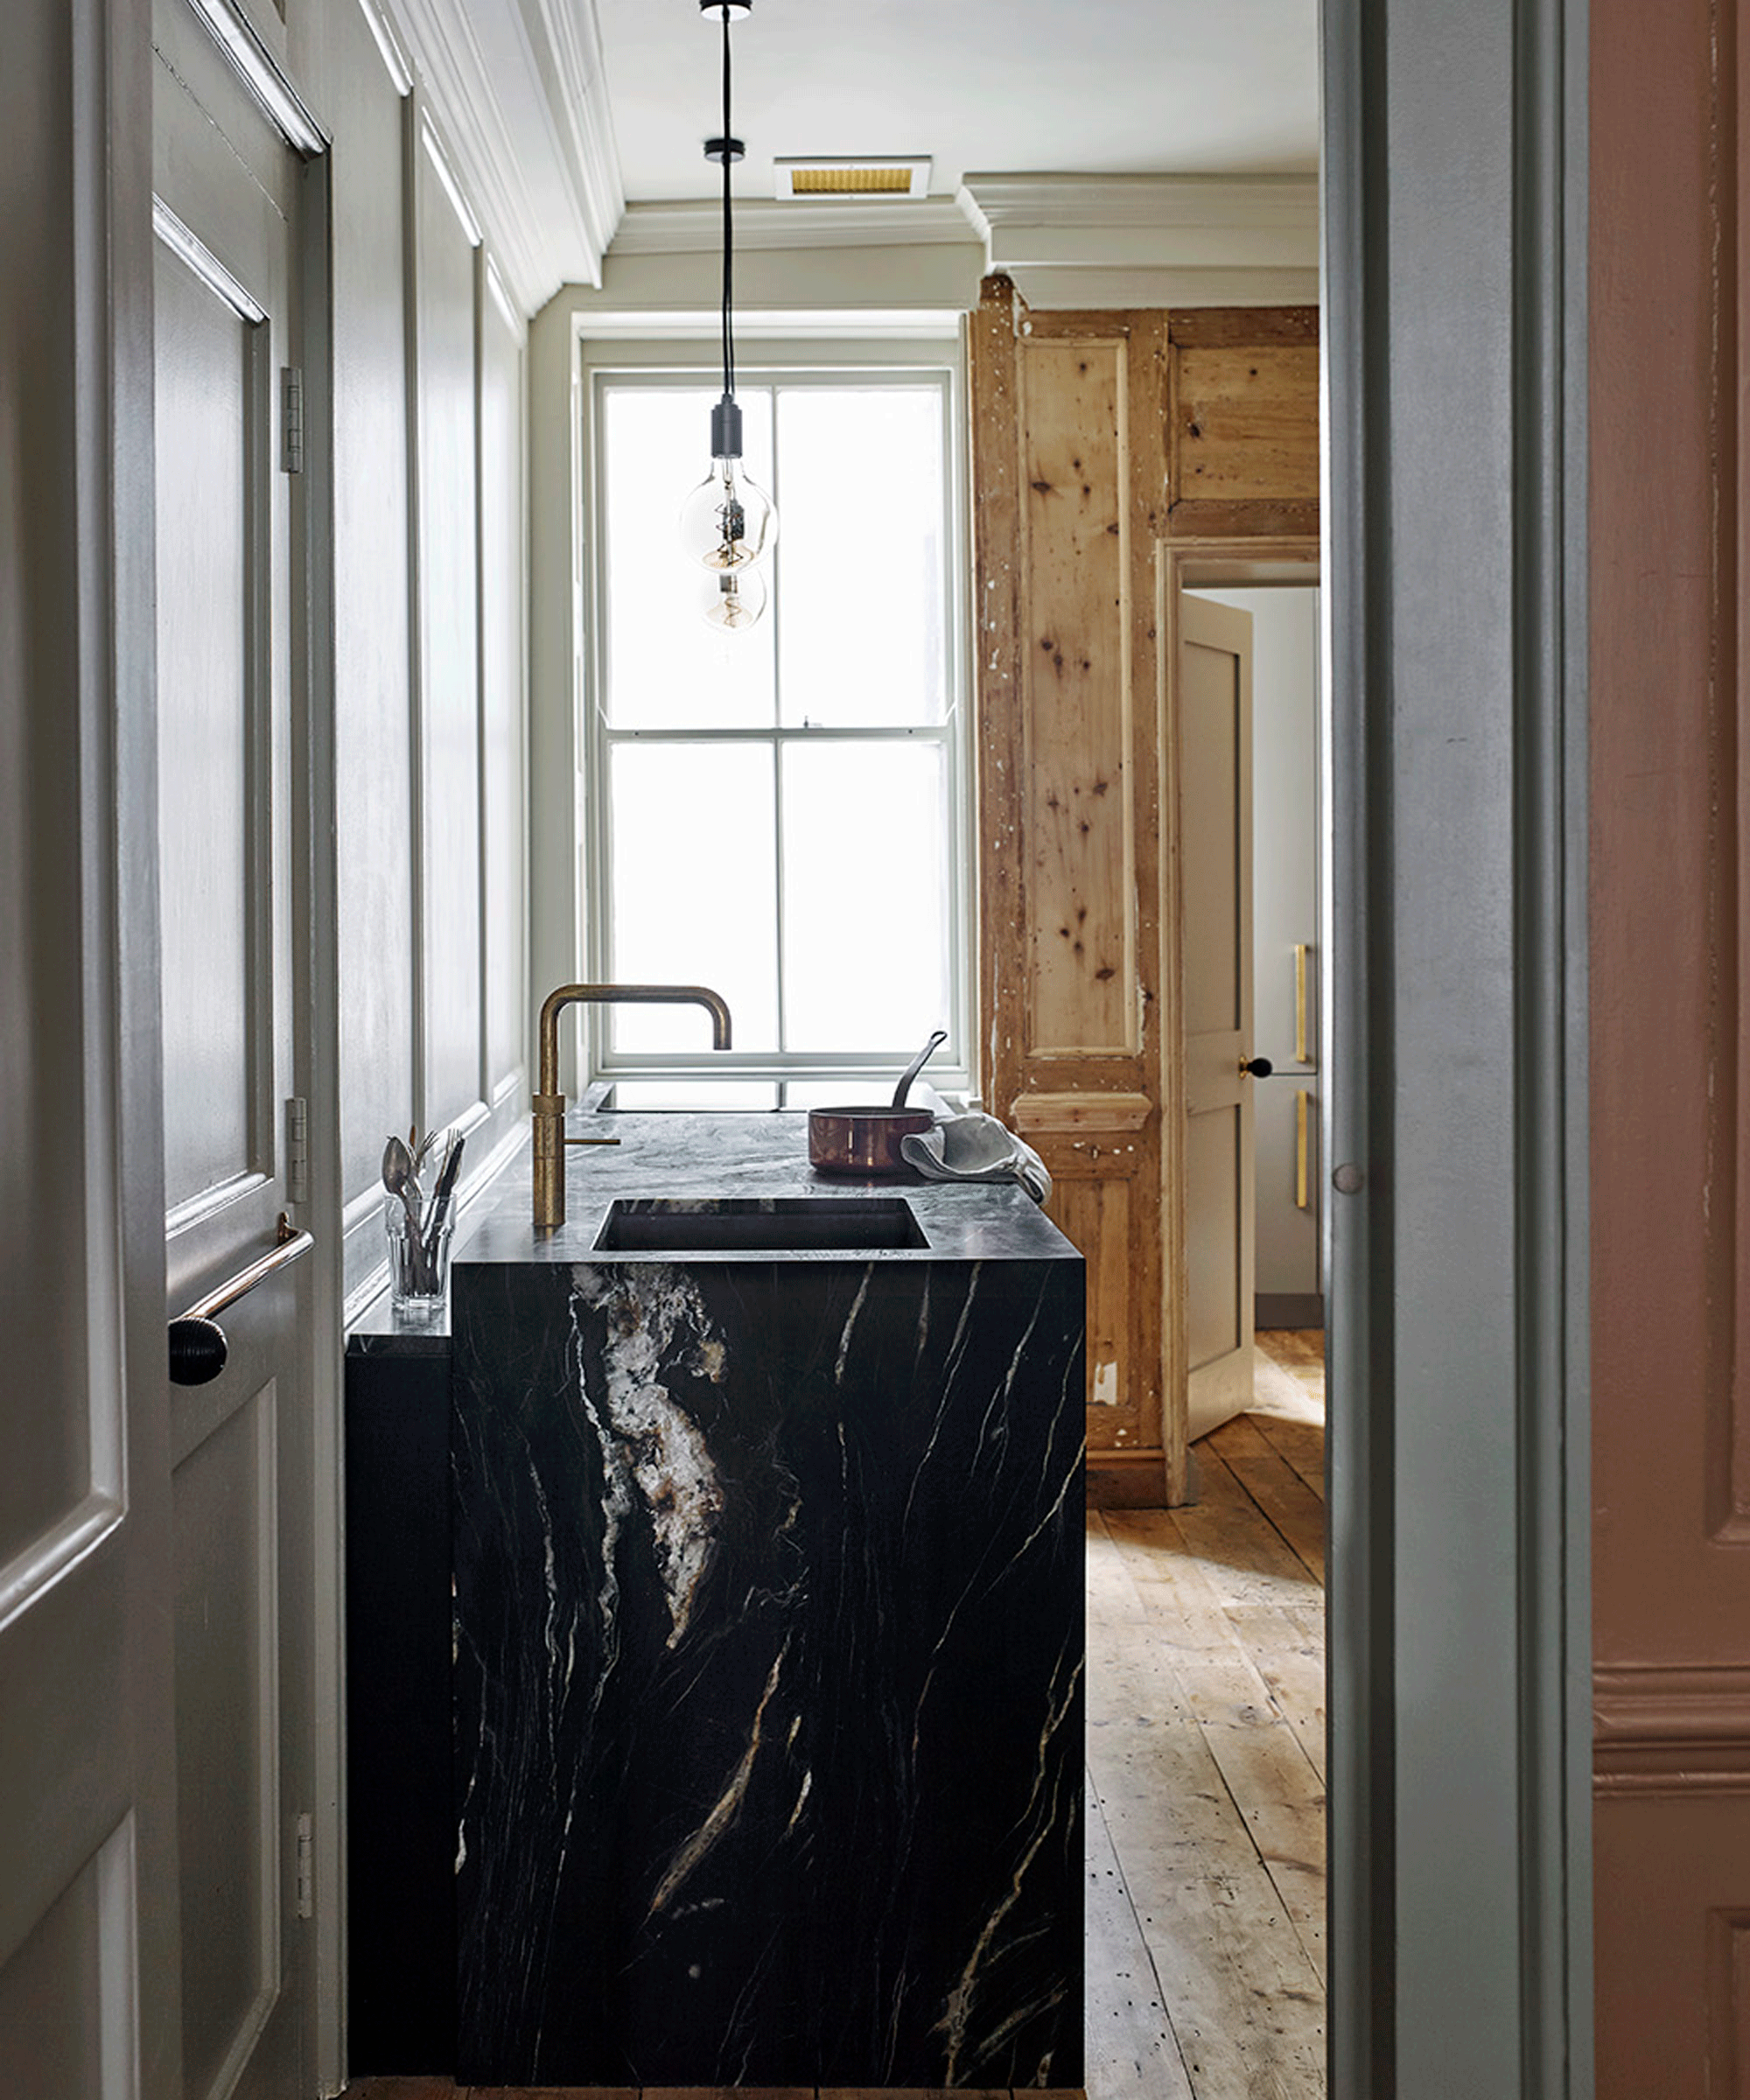 A doorway looking into a kitchen with a black marble surface